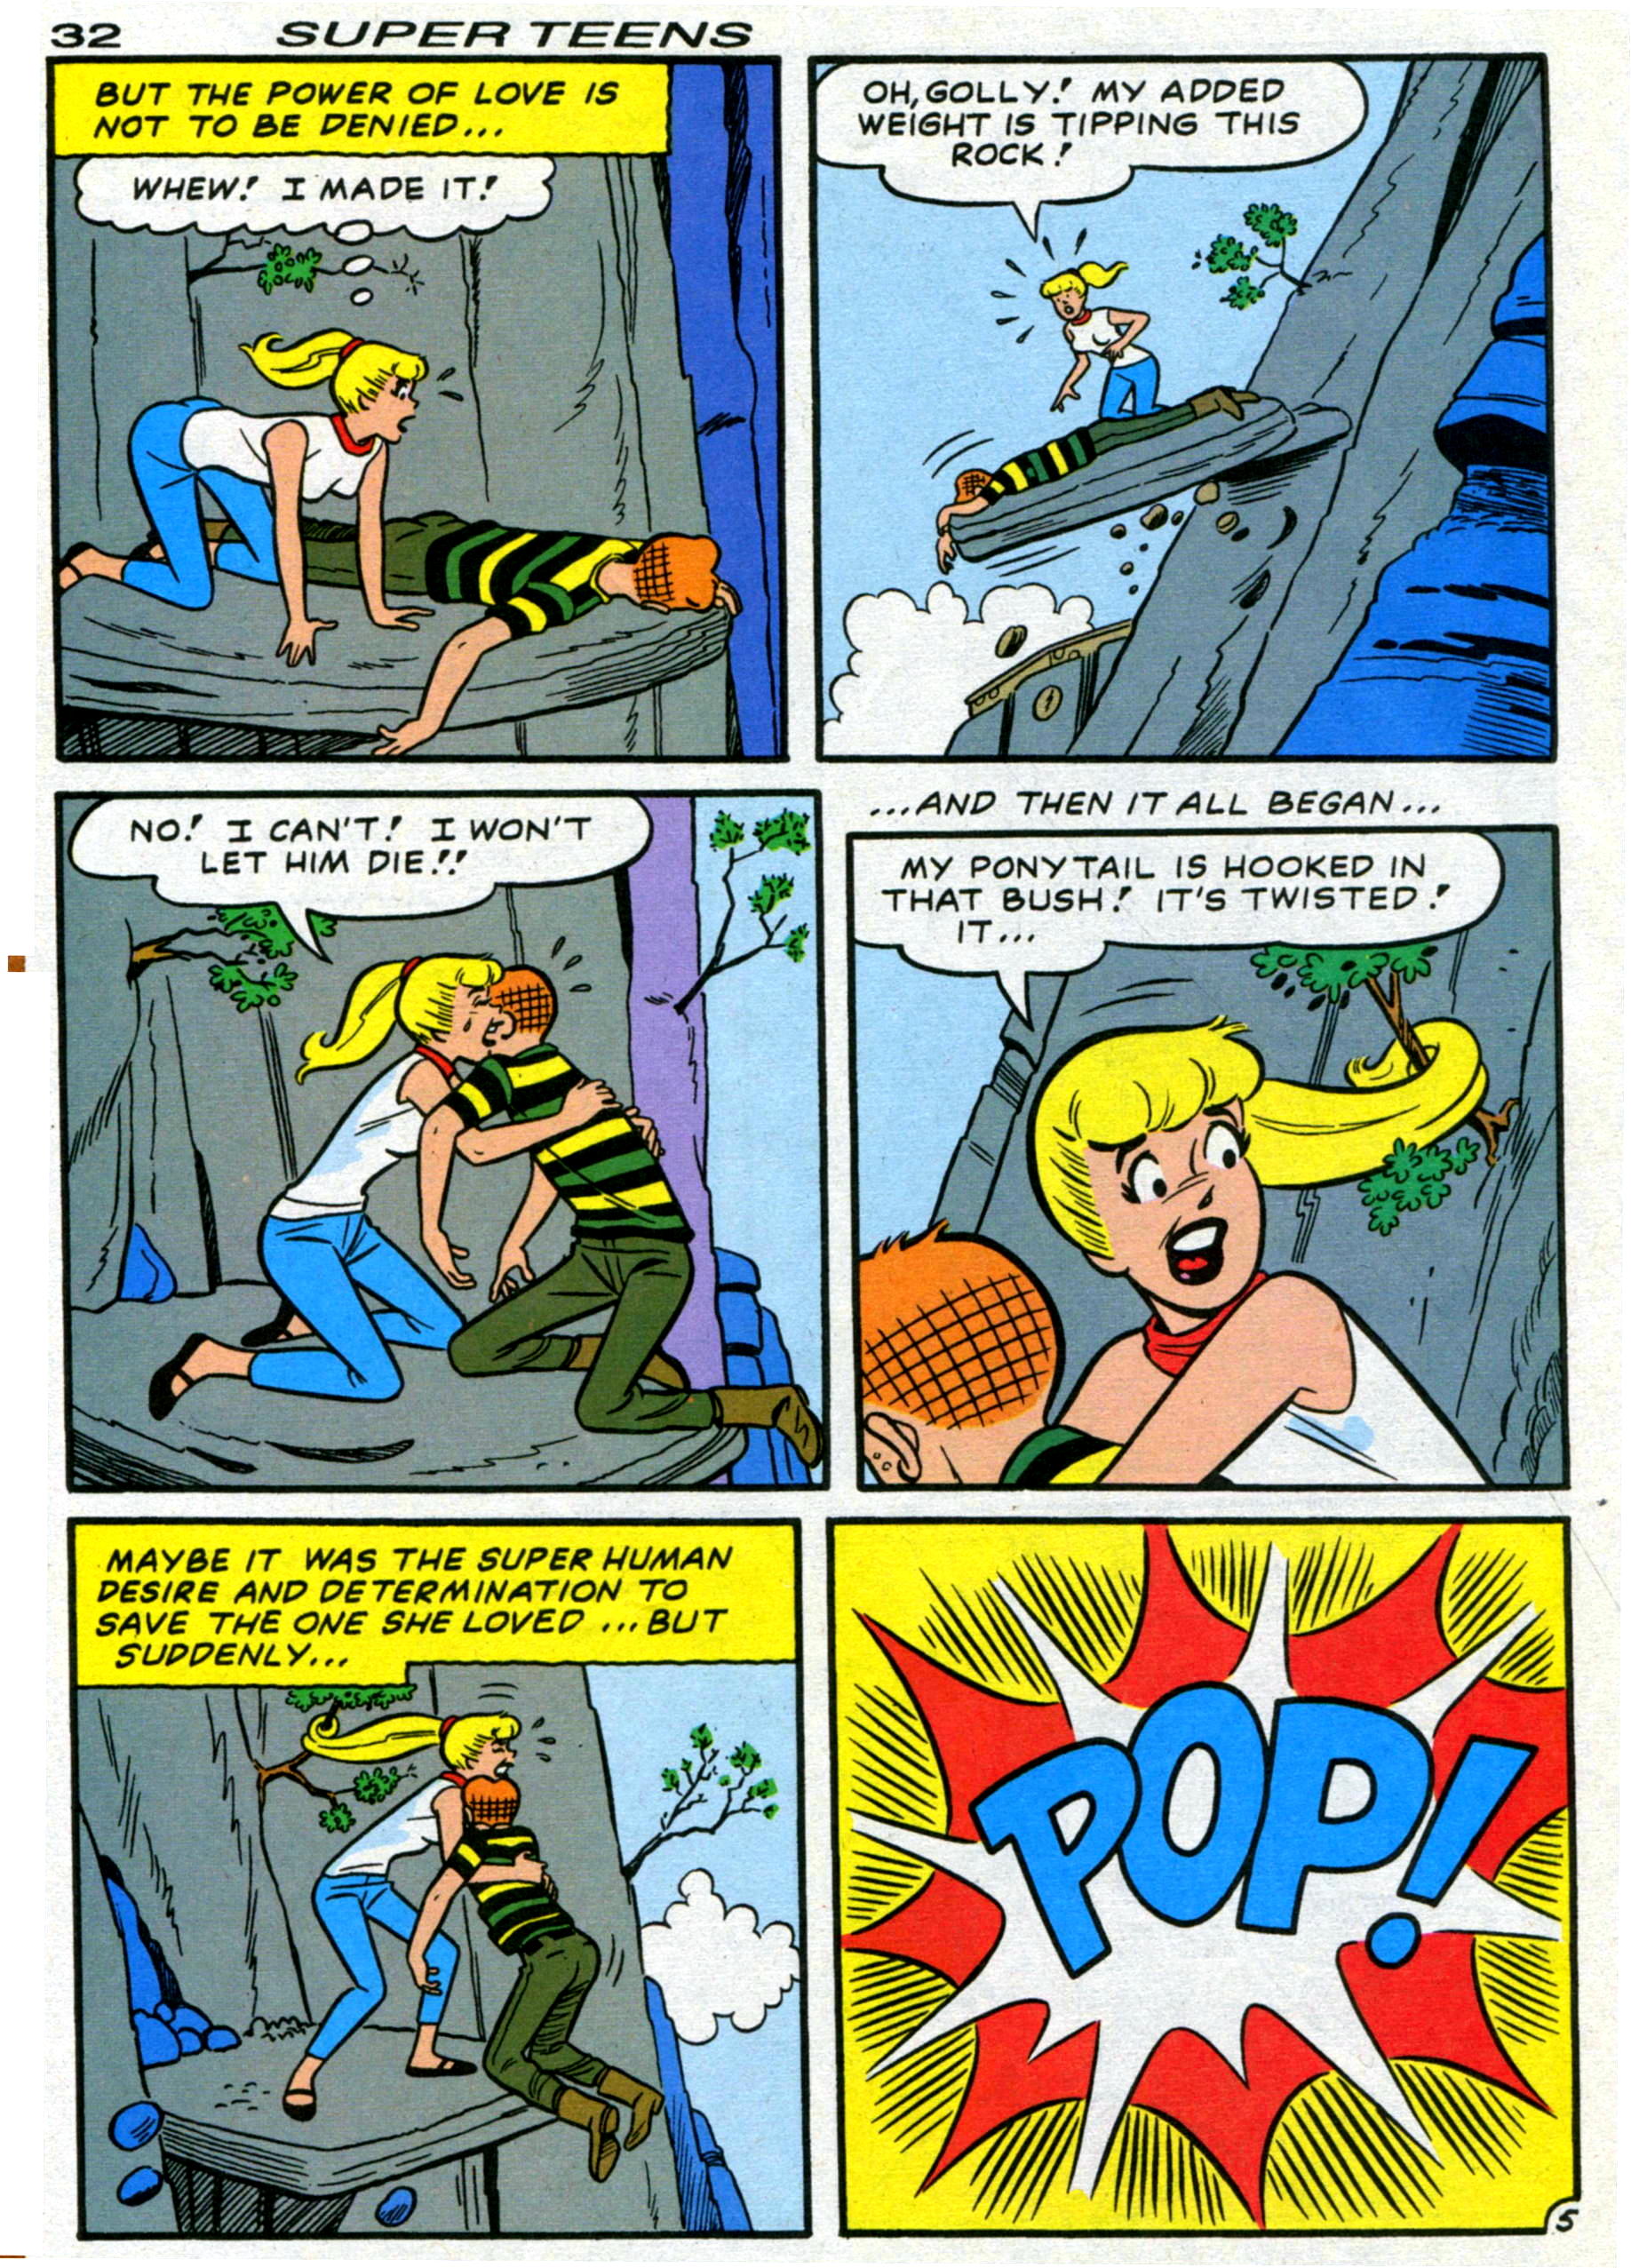 Read online Archie's Super Teens comic -  Issue #1 - 34